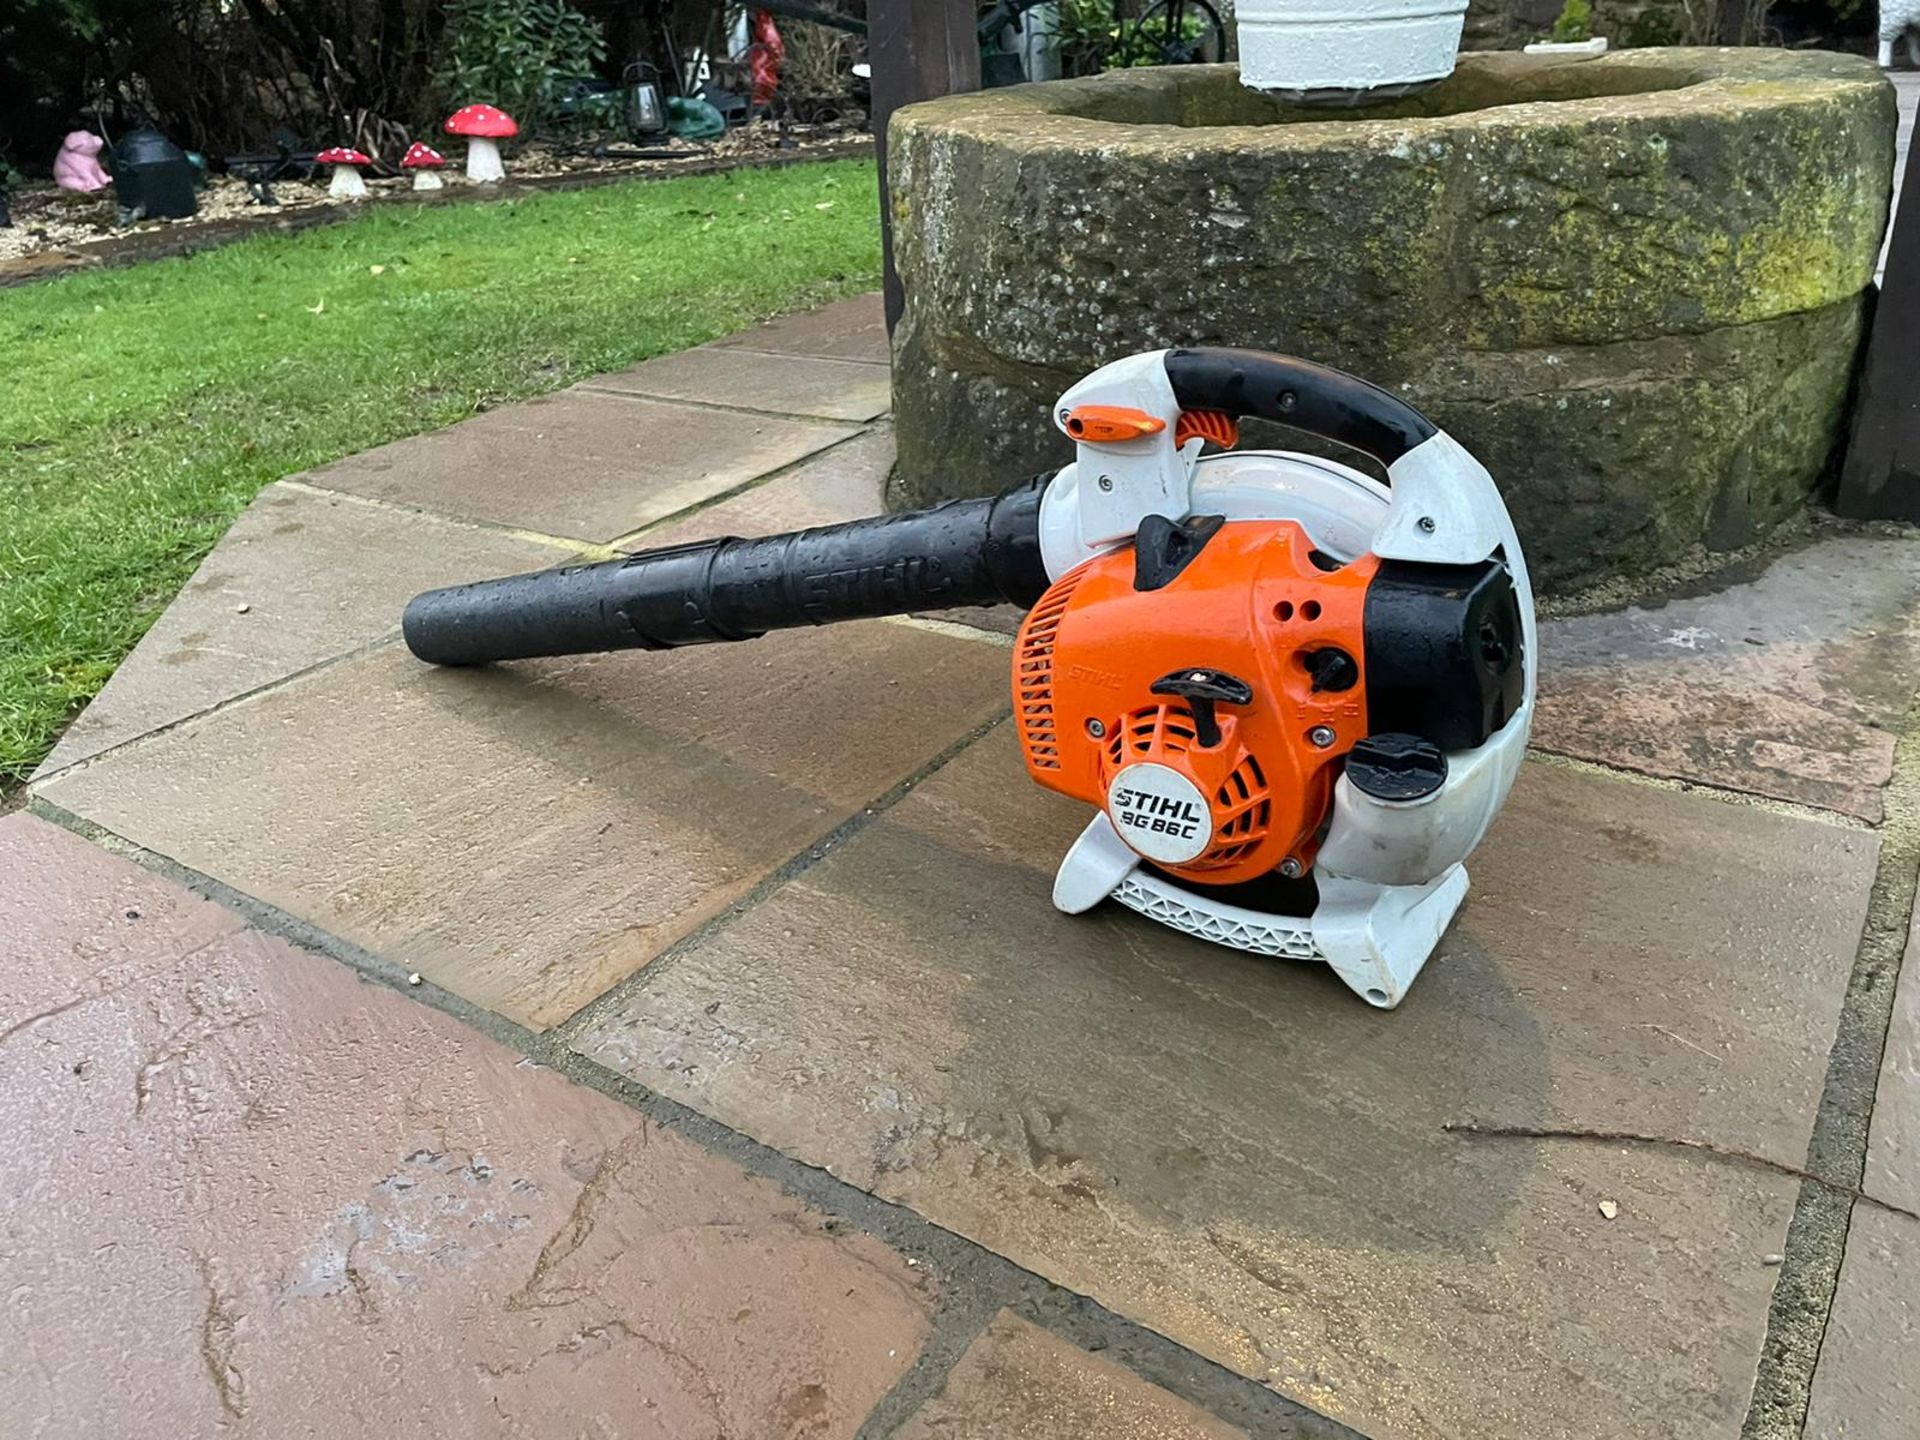 STIHL BG86C-E LEAF BLOWER, RUNS AND WORKS, CLEAN MACHINE, BOUGHT BRAND NEW 2 YEARS AGO *NO VAT* - Image 2 of 4